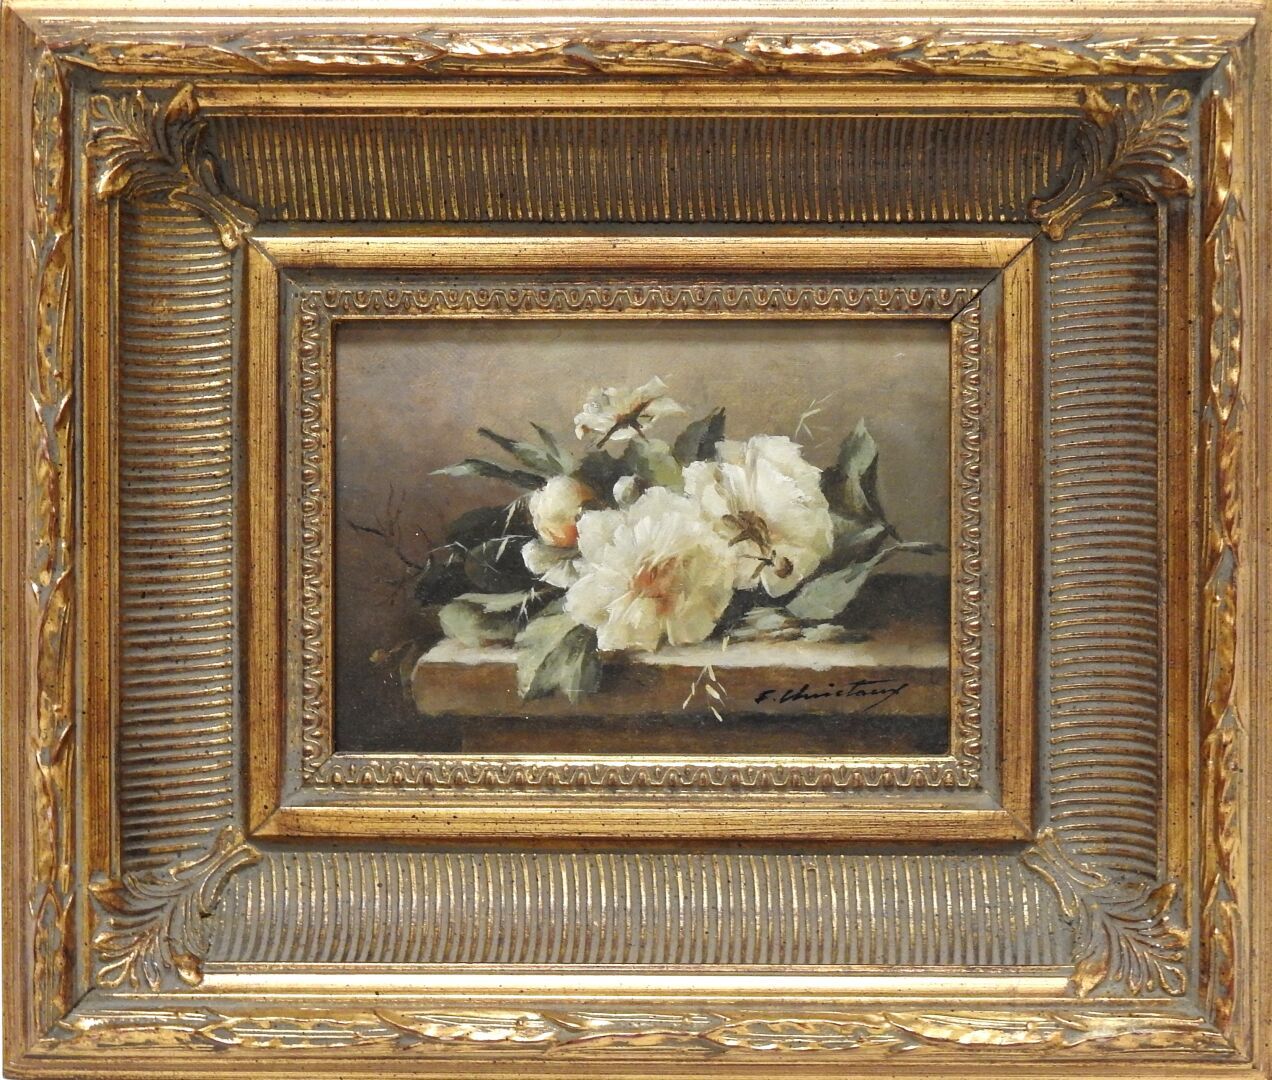 Null F. CHRISTAUNY - XXth century
Bouquet of flowers on an entablature.
Oil on c&hellip;